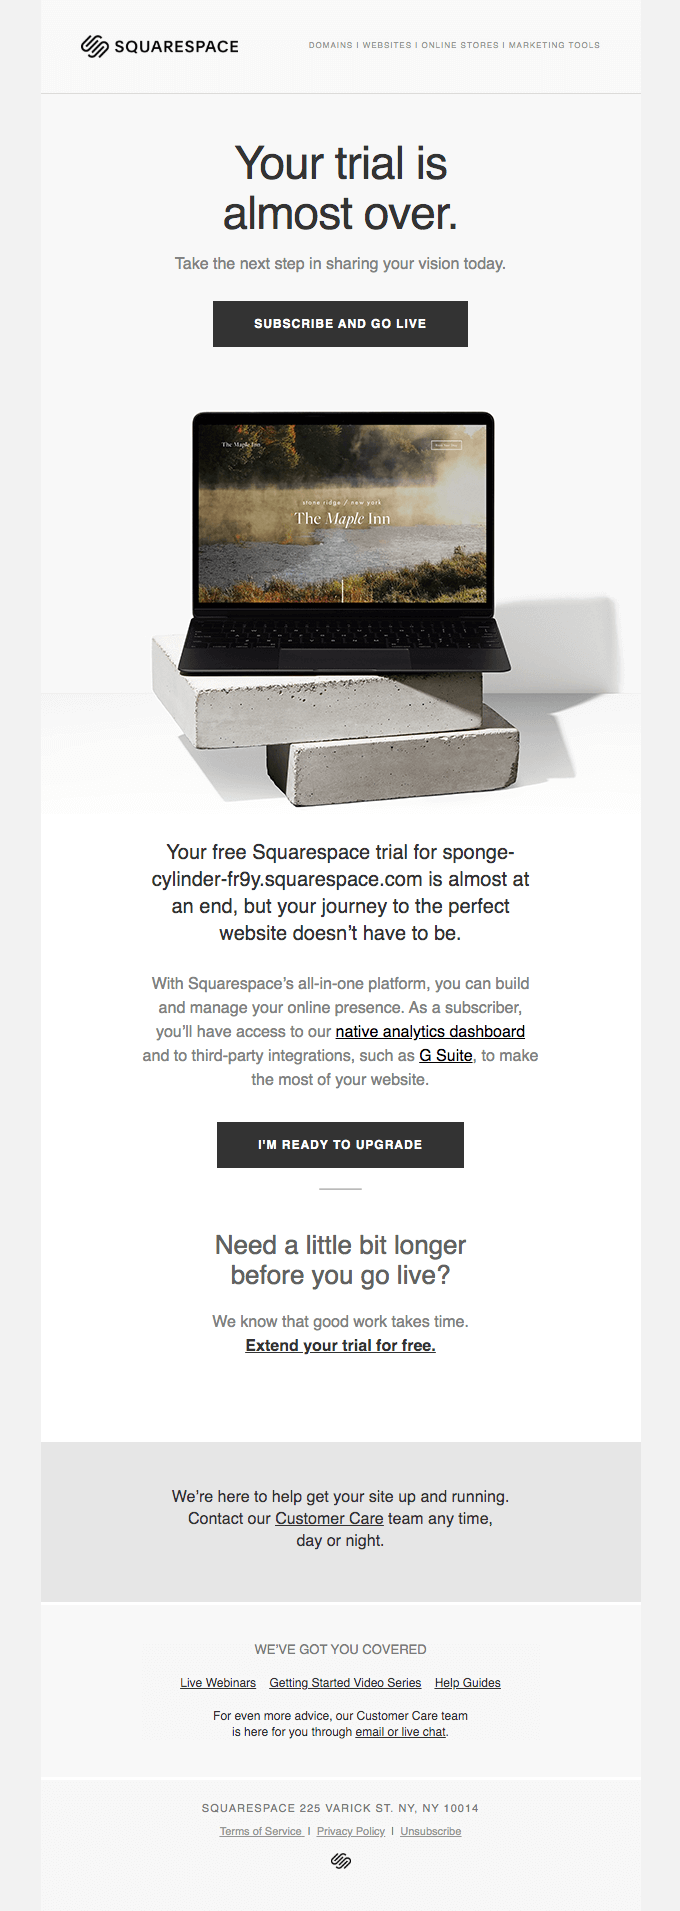 An email offering to upgrade the subscription